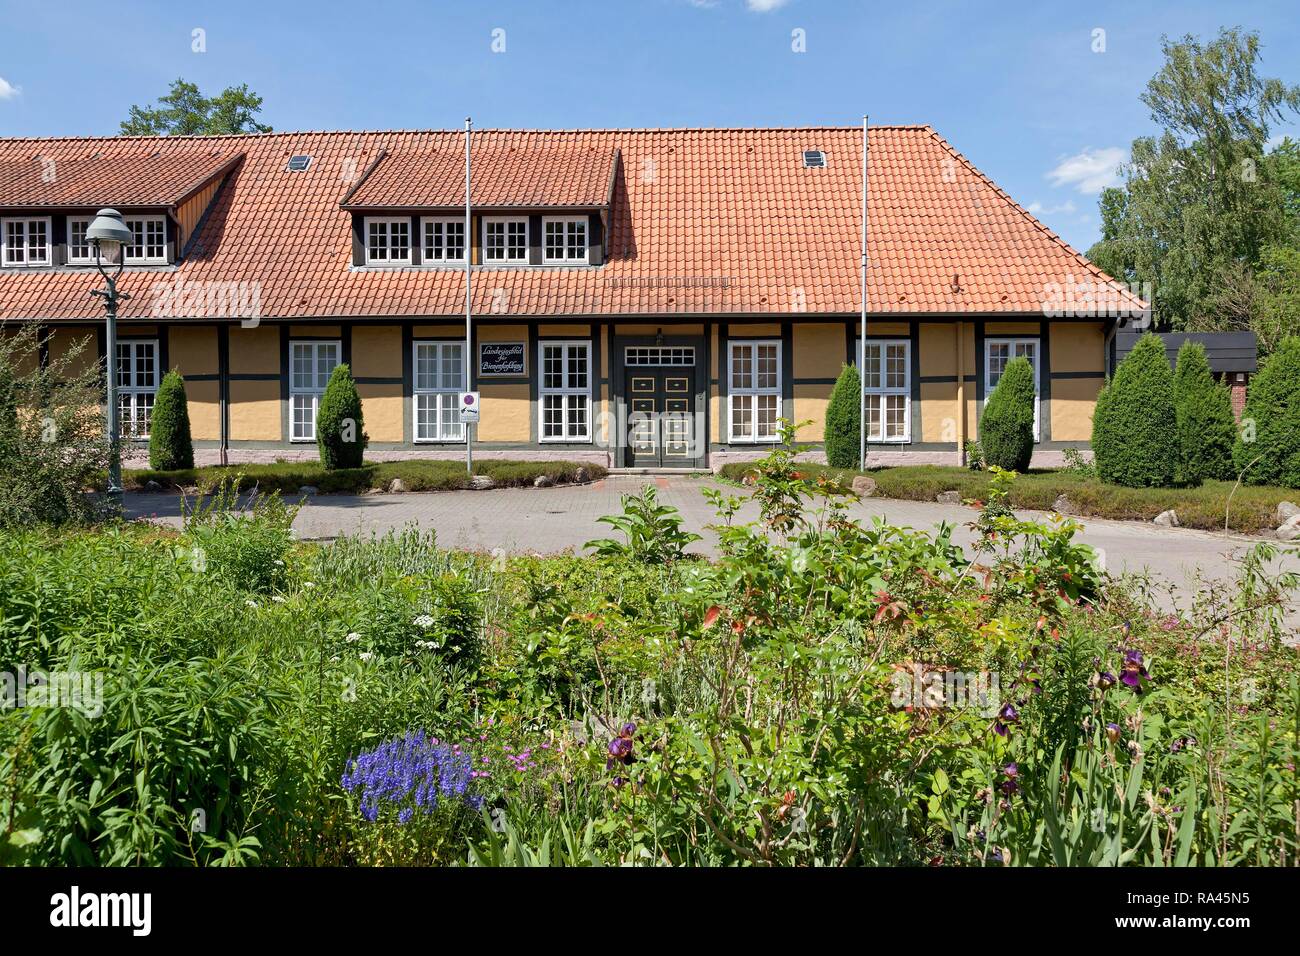 Institute for Apiculture, French Garden, Celle, Lower Saxony, Germany Stock Photo